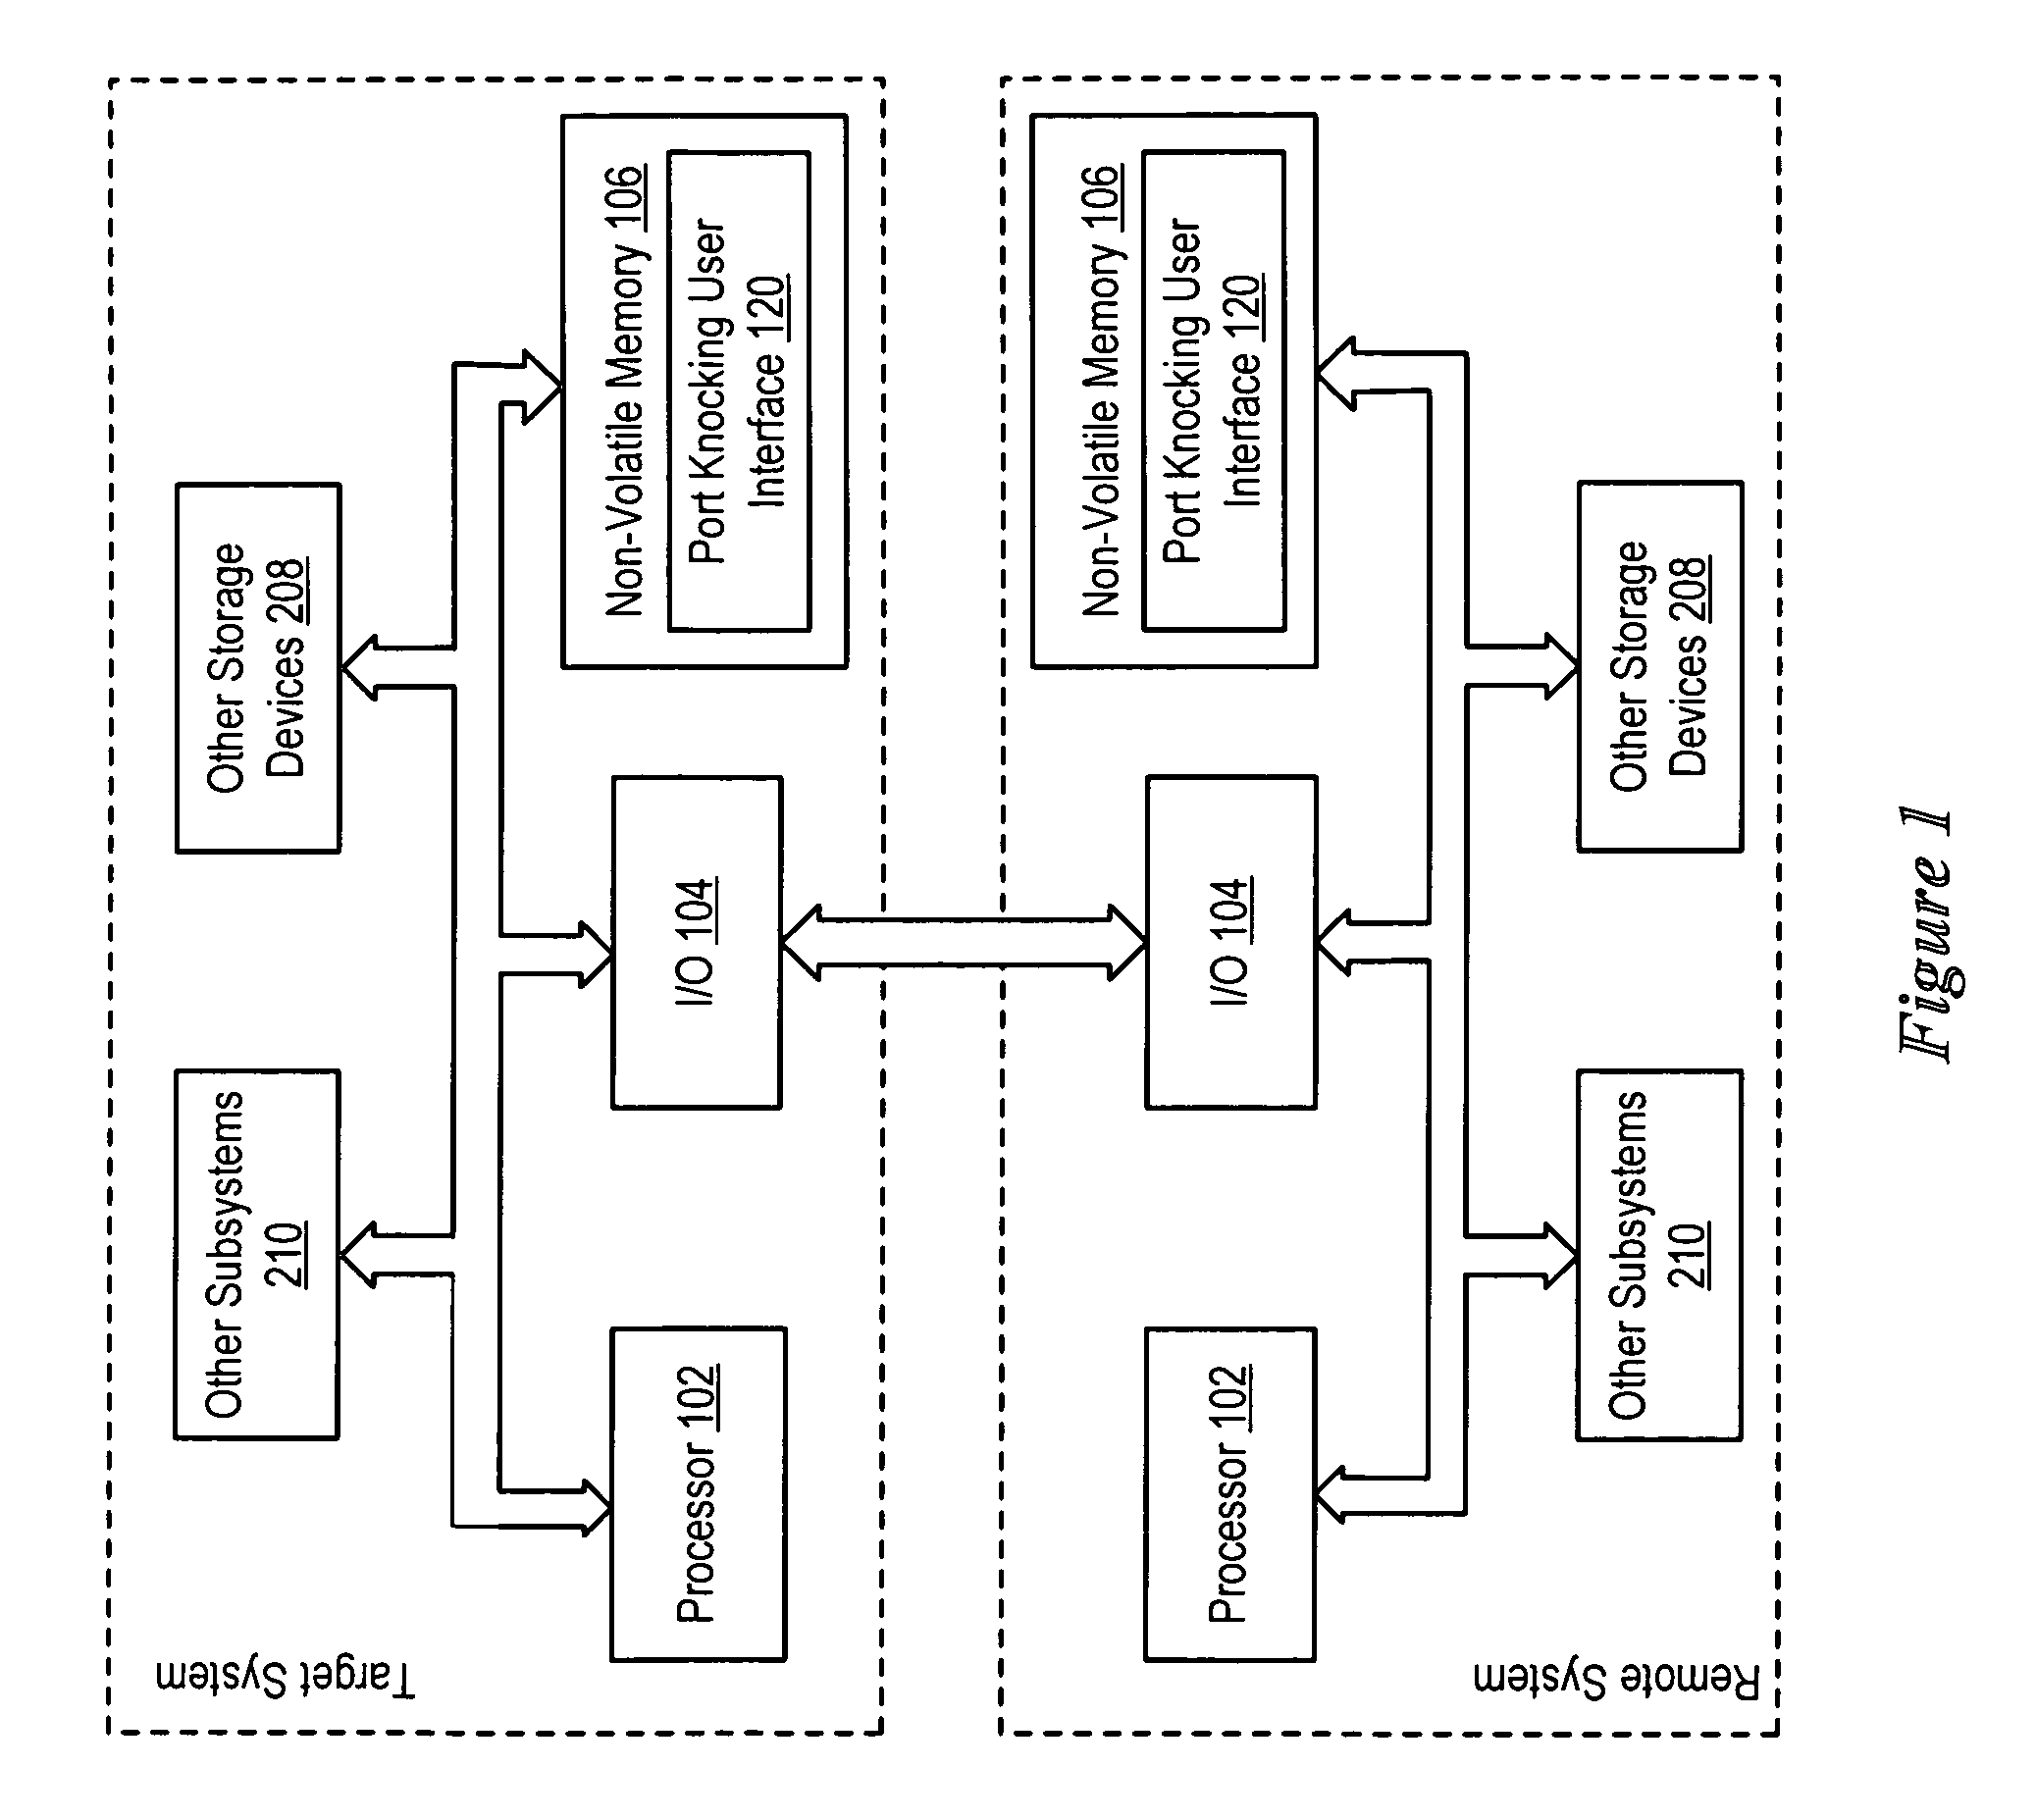 Keypad user interface and port sequence mapping algorithm